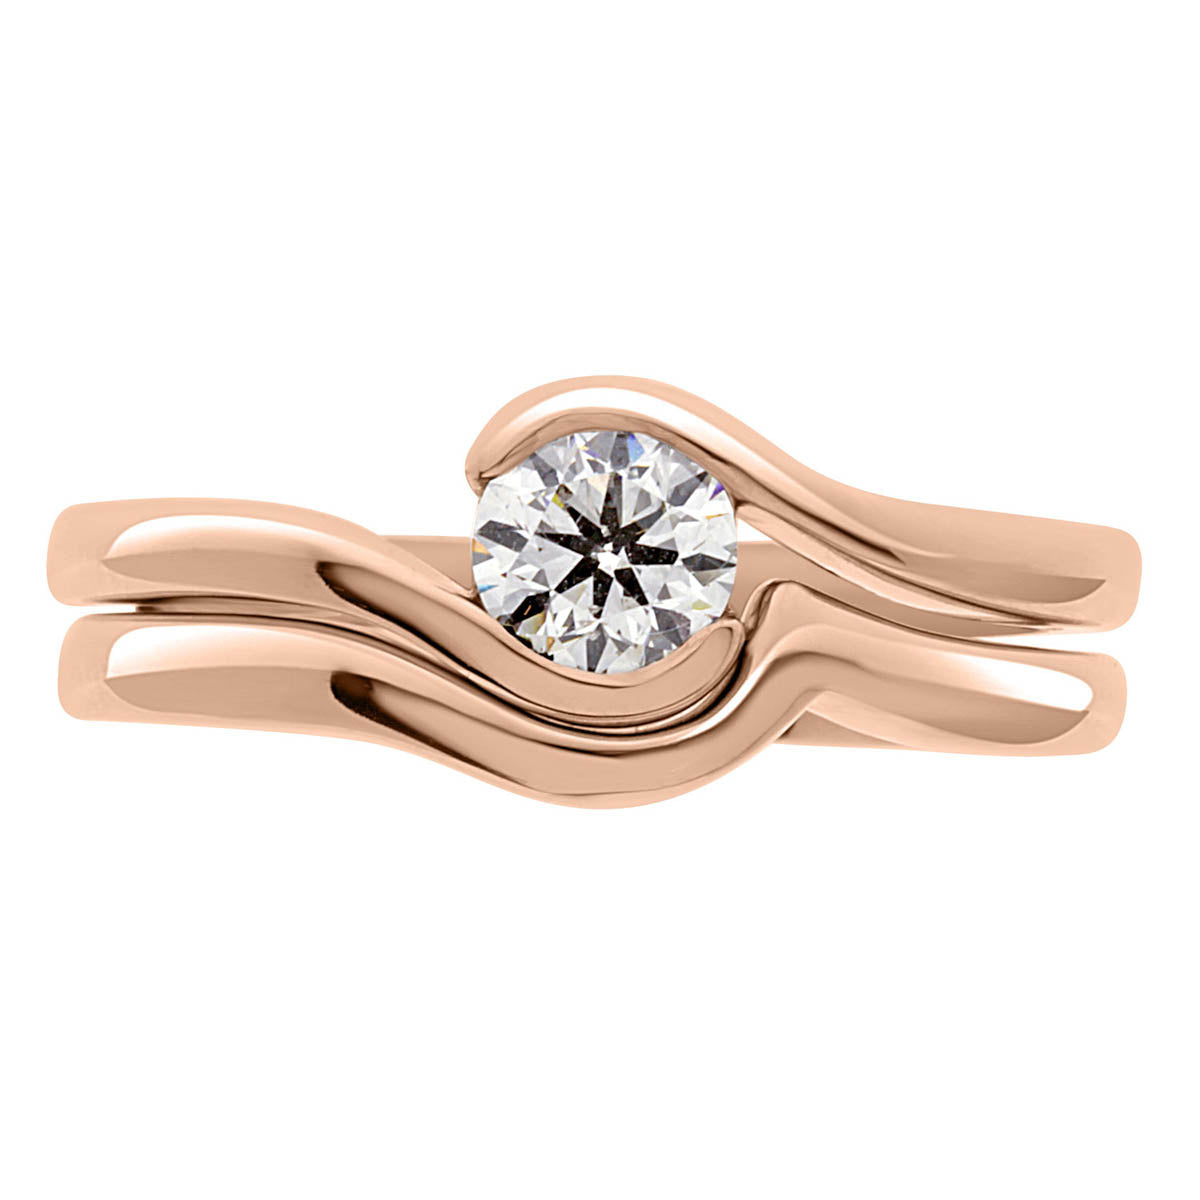 Tension Set Diamond Ring made in rose gold with a matching wedding ring